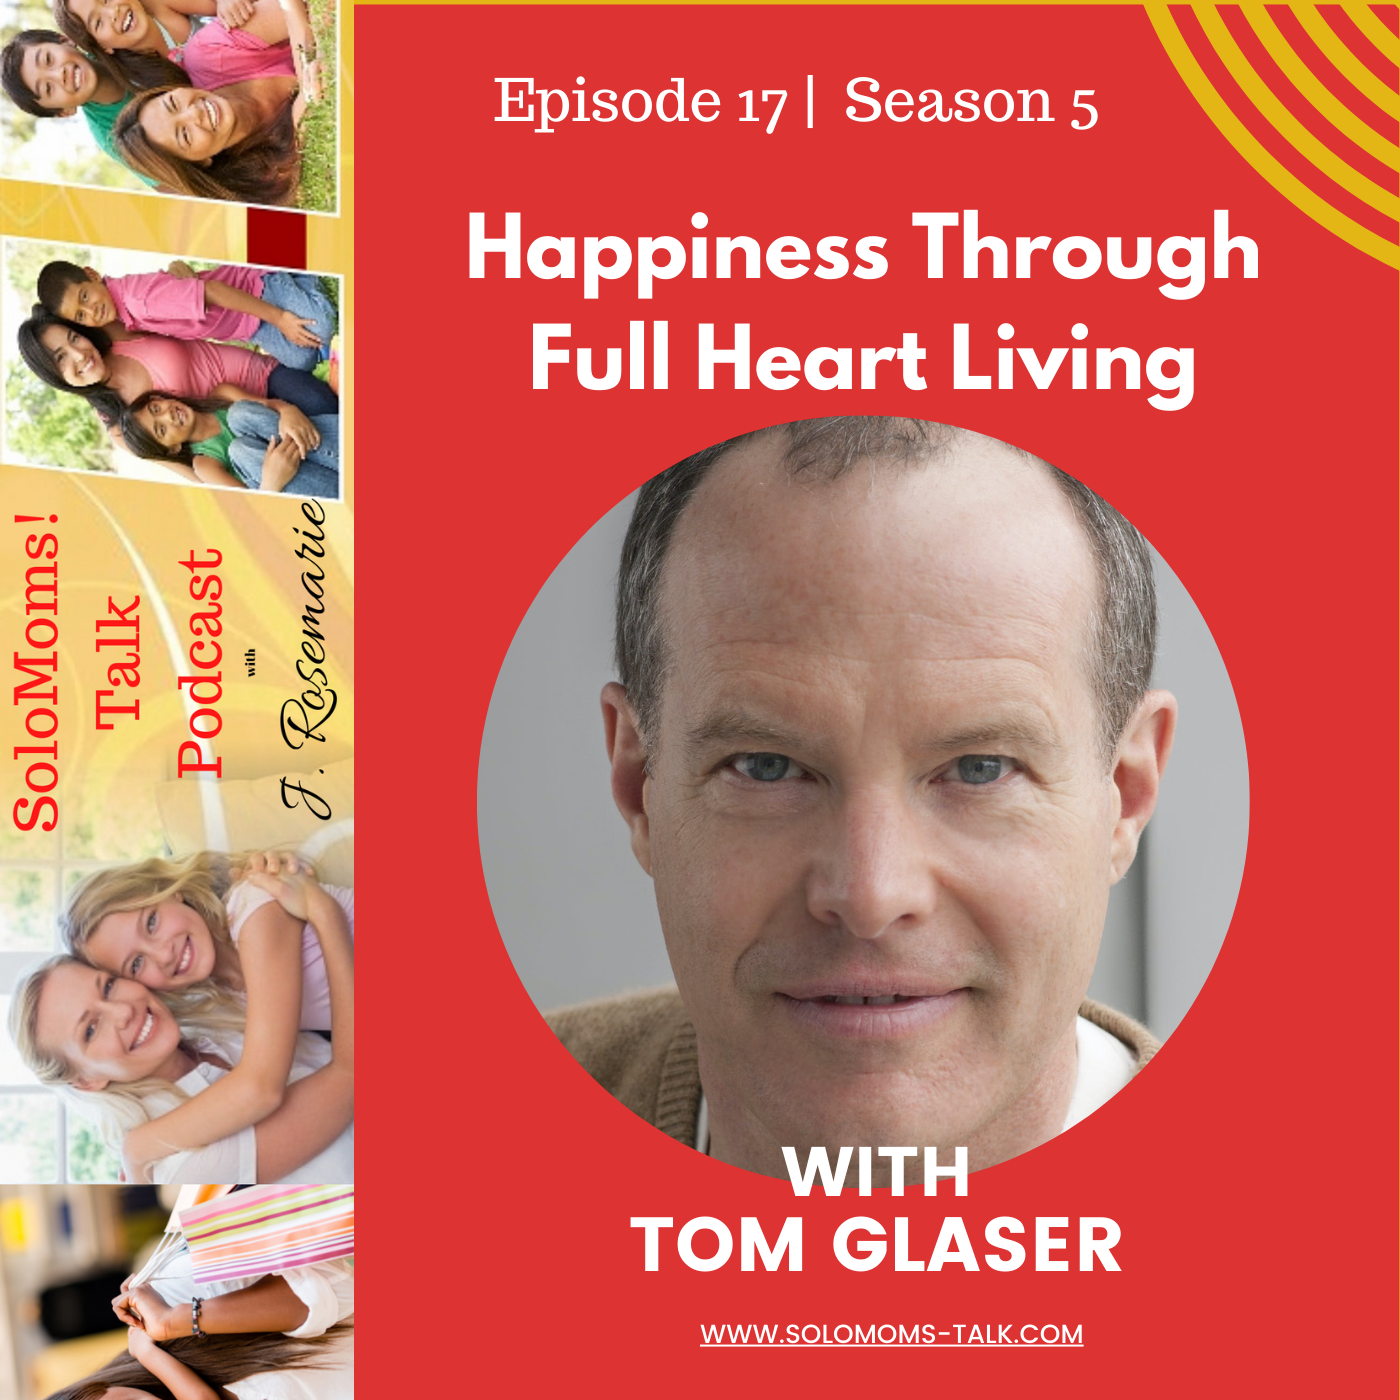 Discovering Happiness Through Full Heart Living w/Tom Glaser